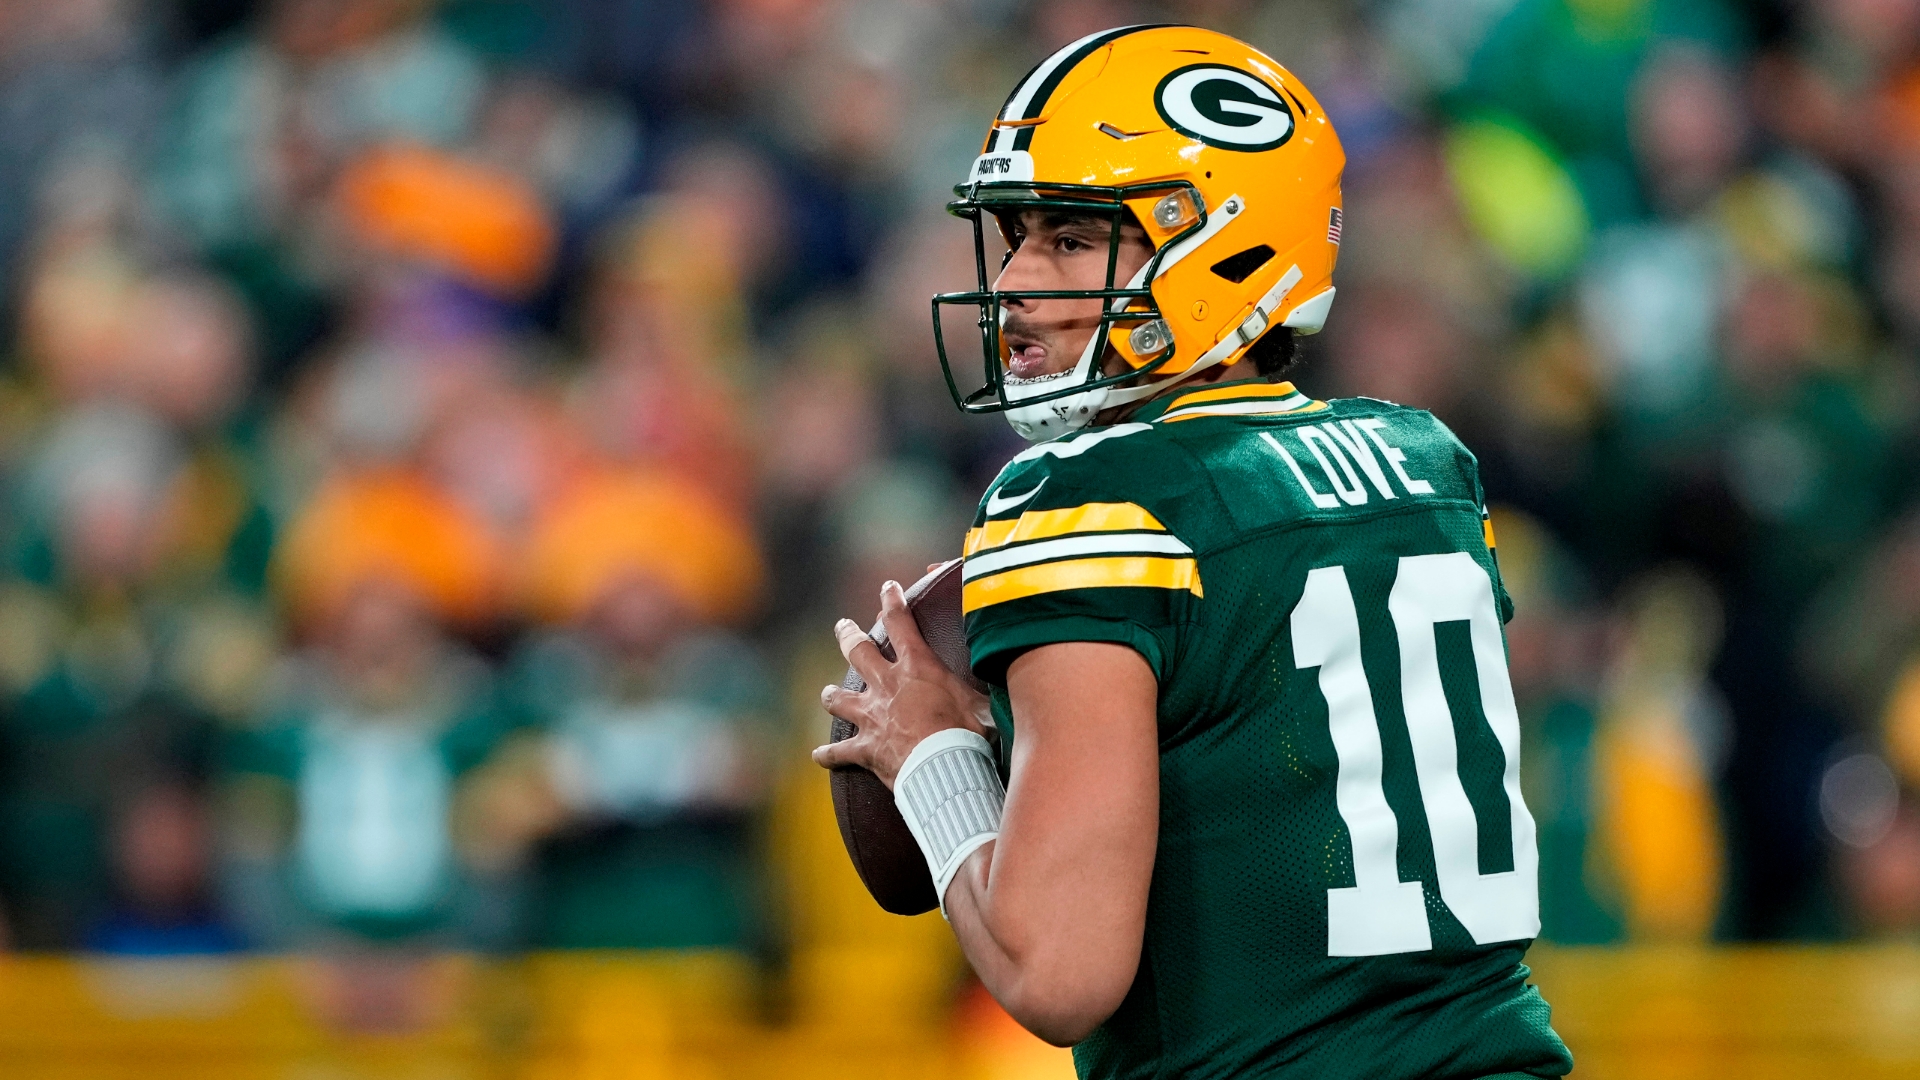 packers playoff picture: where green bay stands in nfc wild card race after win over chiefs on 'sunday night football'